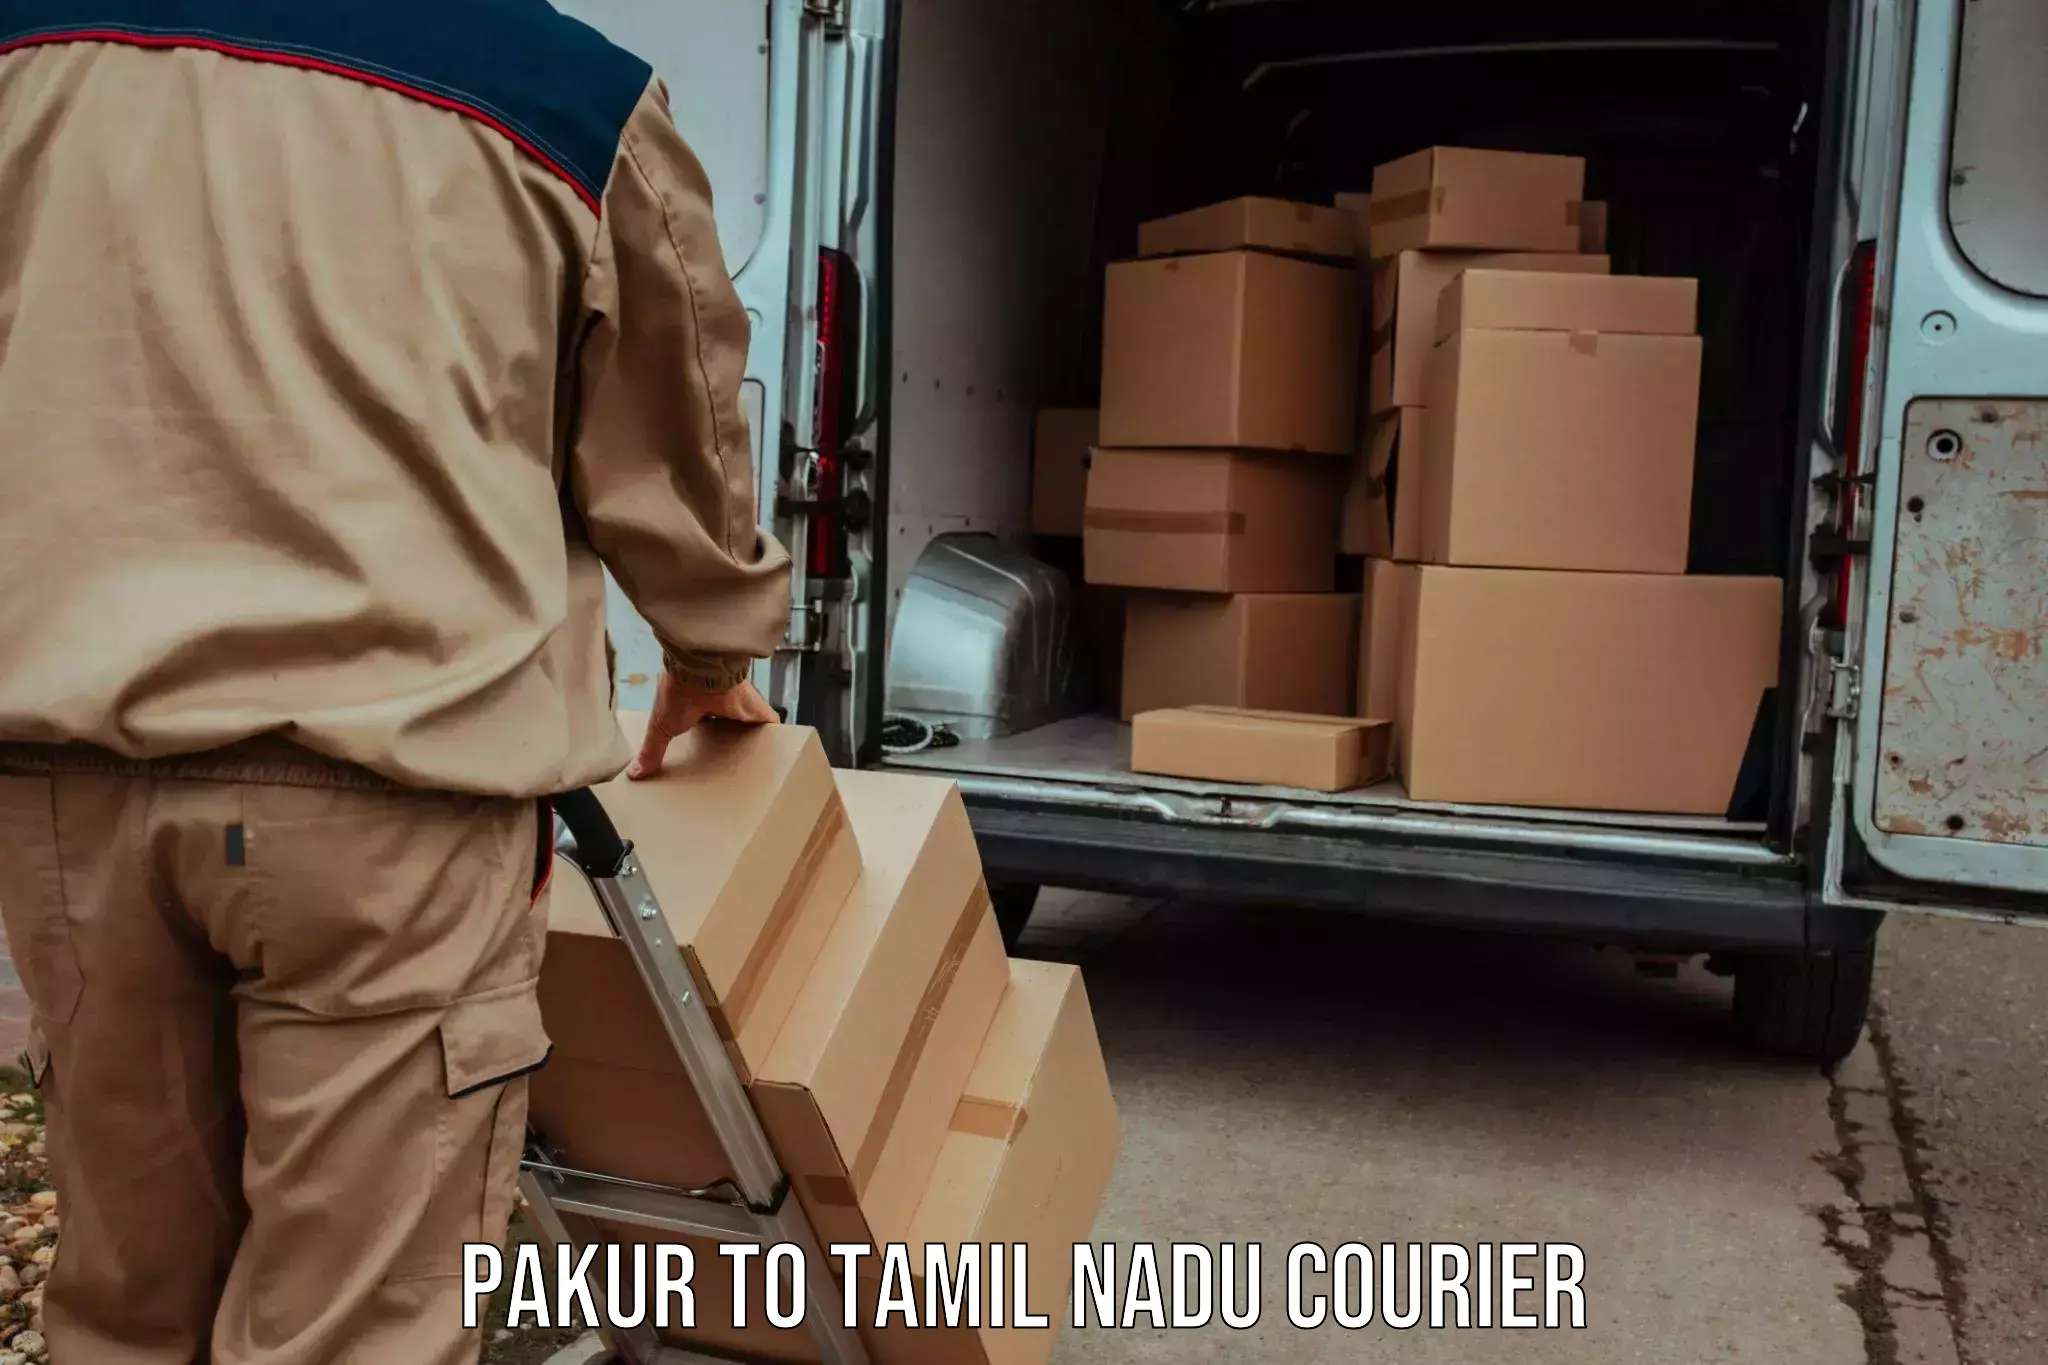 Modern courier technology Pakur to Tamil Nadu